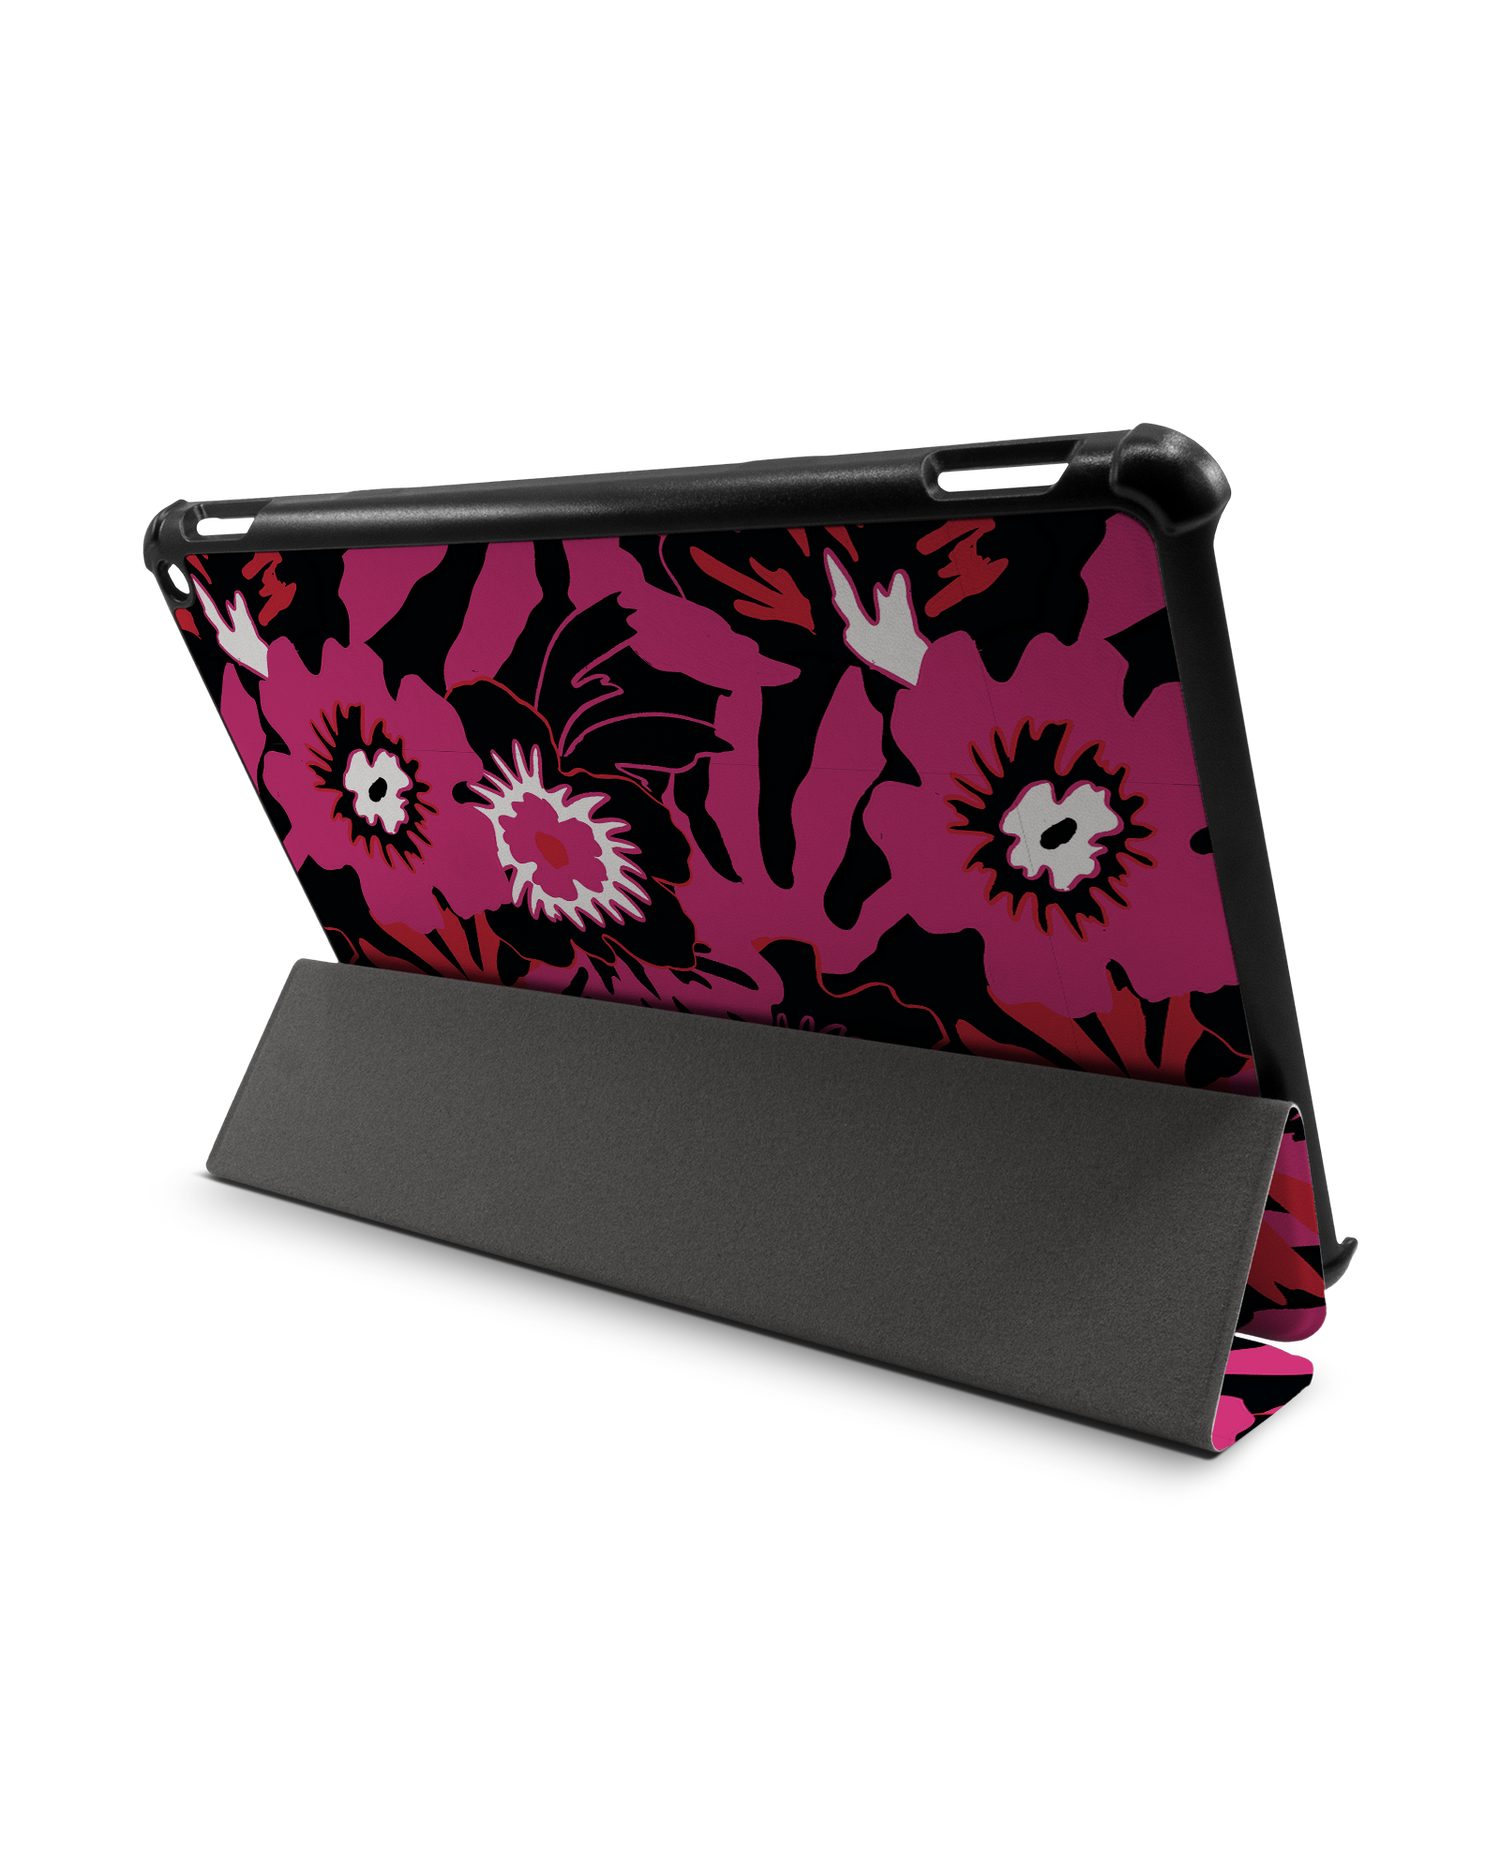 Flower Works Tablet Smart Case for Amazon Fire HD 10 (2021): Used as Stand